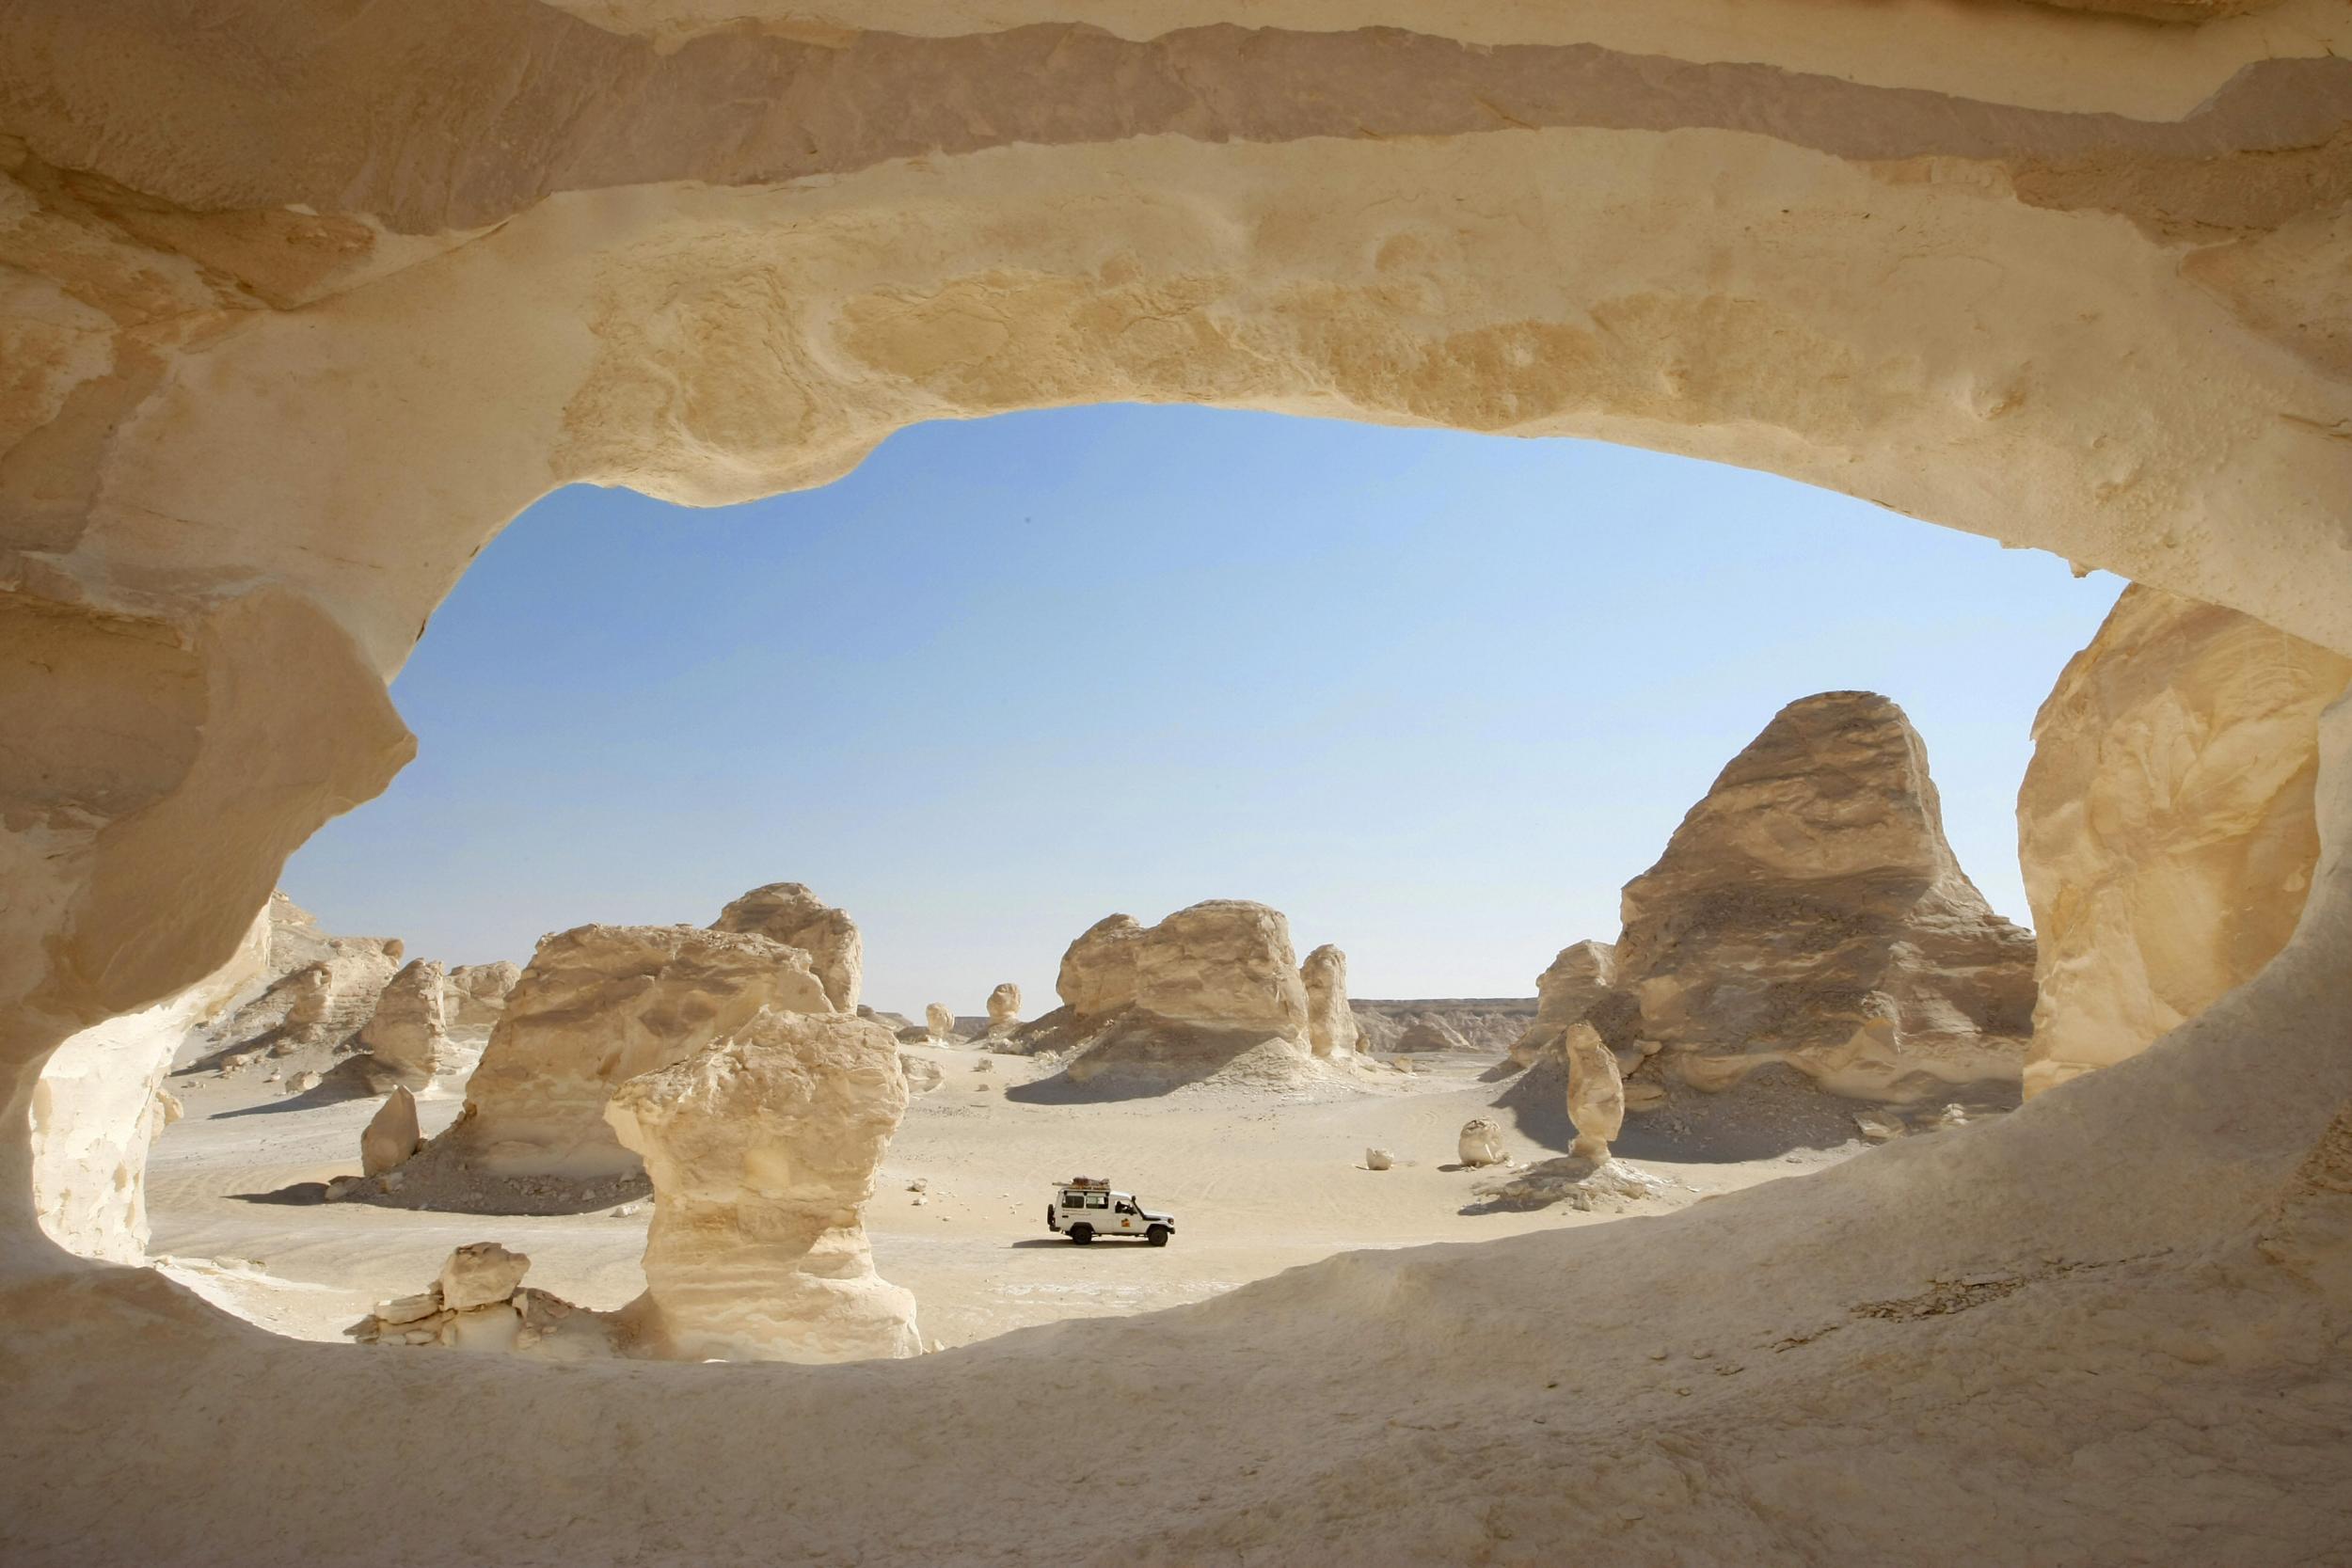 Egypt's White Desert is known for its unusual wind-formed limestone formations